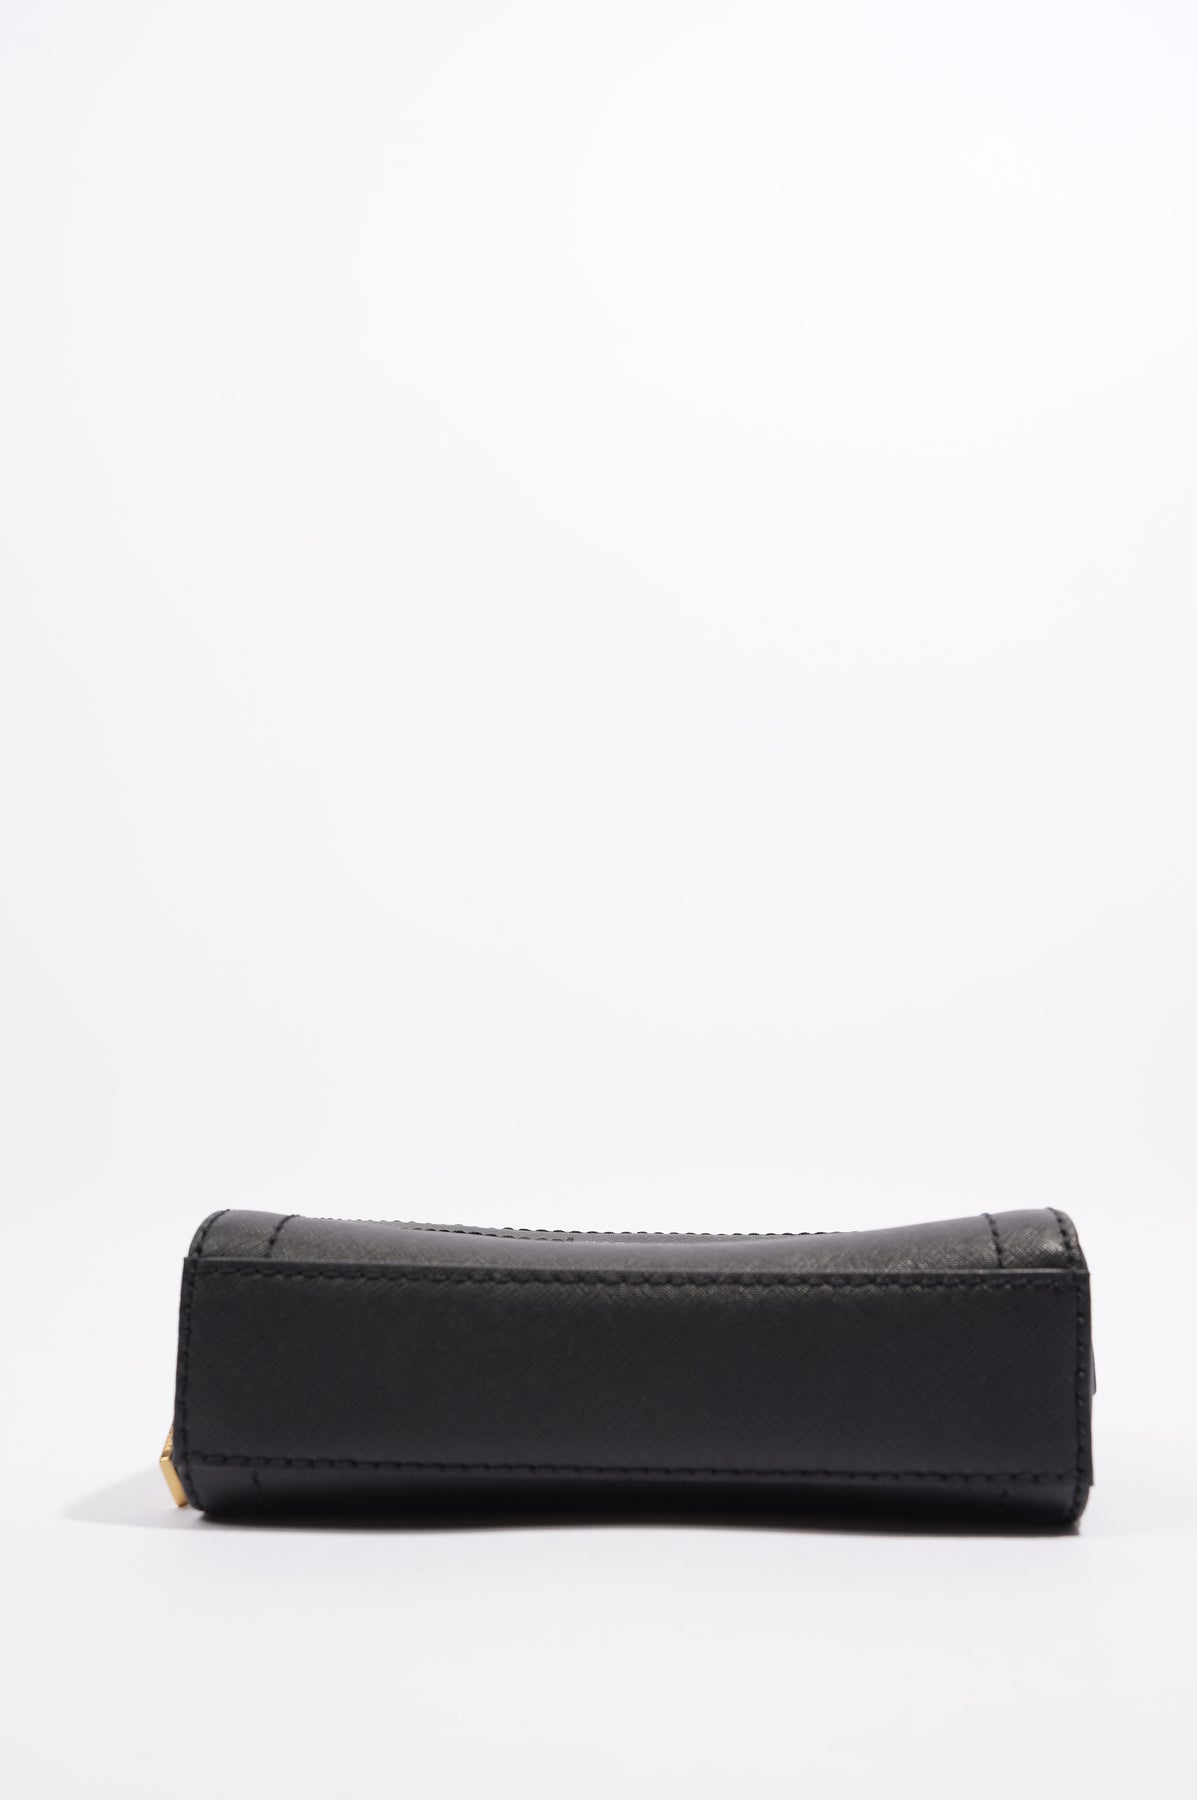 NWT MARC JACOBS Playback Crossbody Bag In Black Saffiano Leather